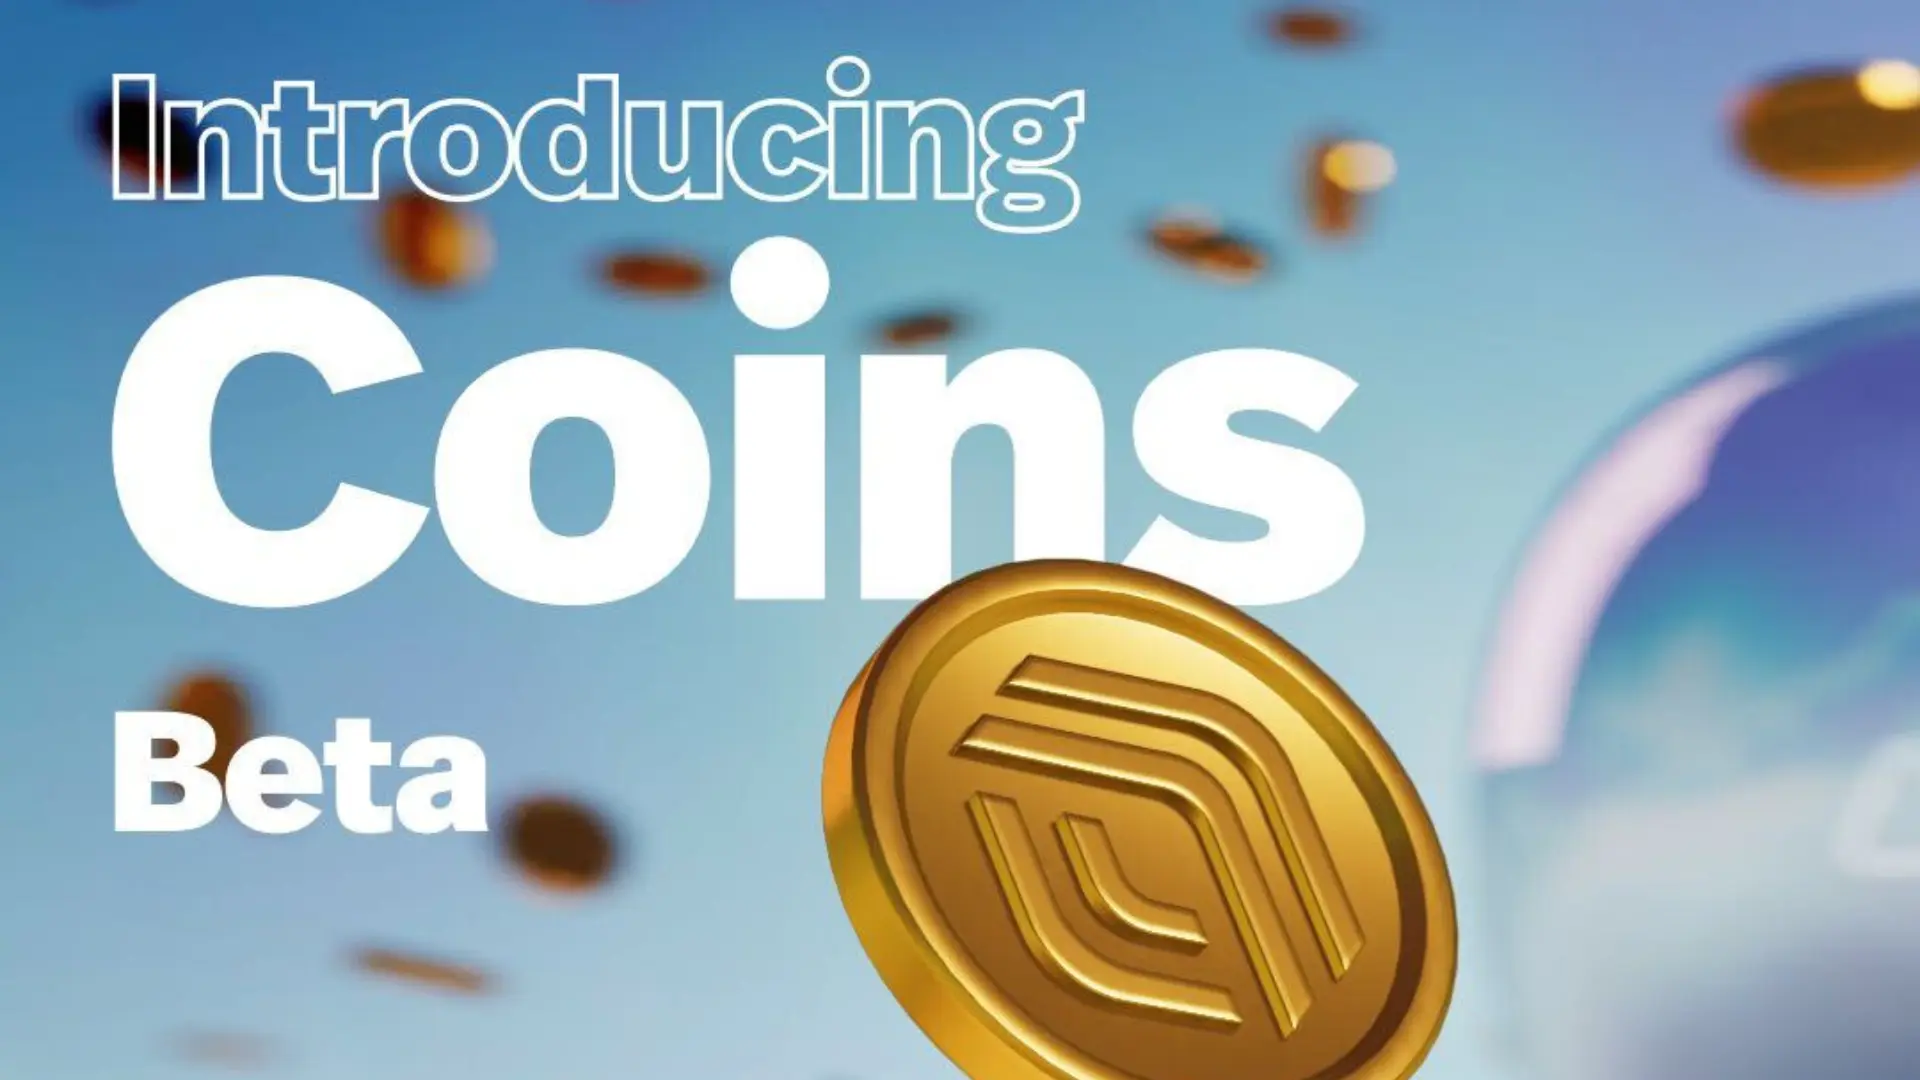 Introducing Coins